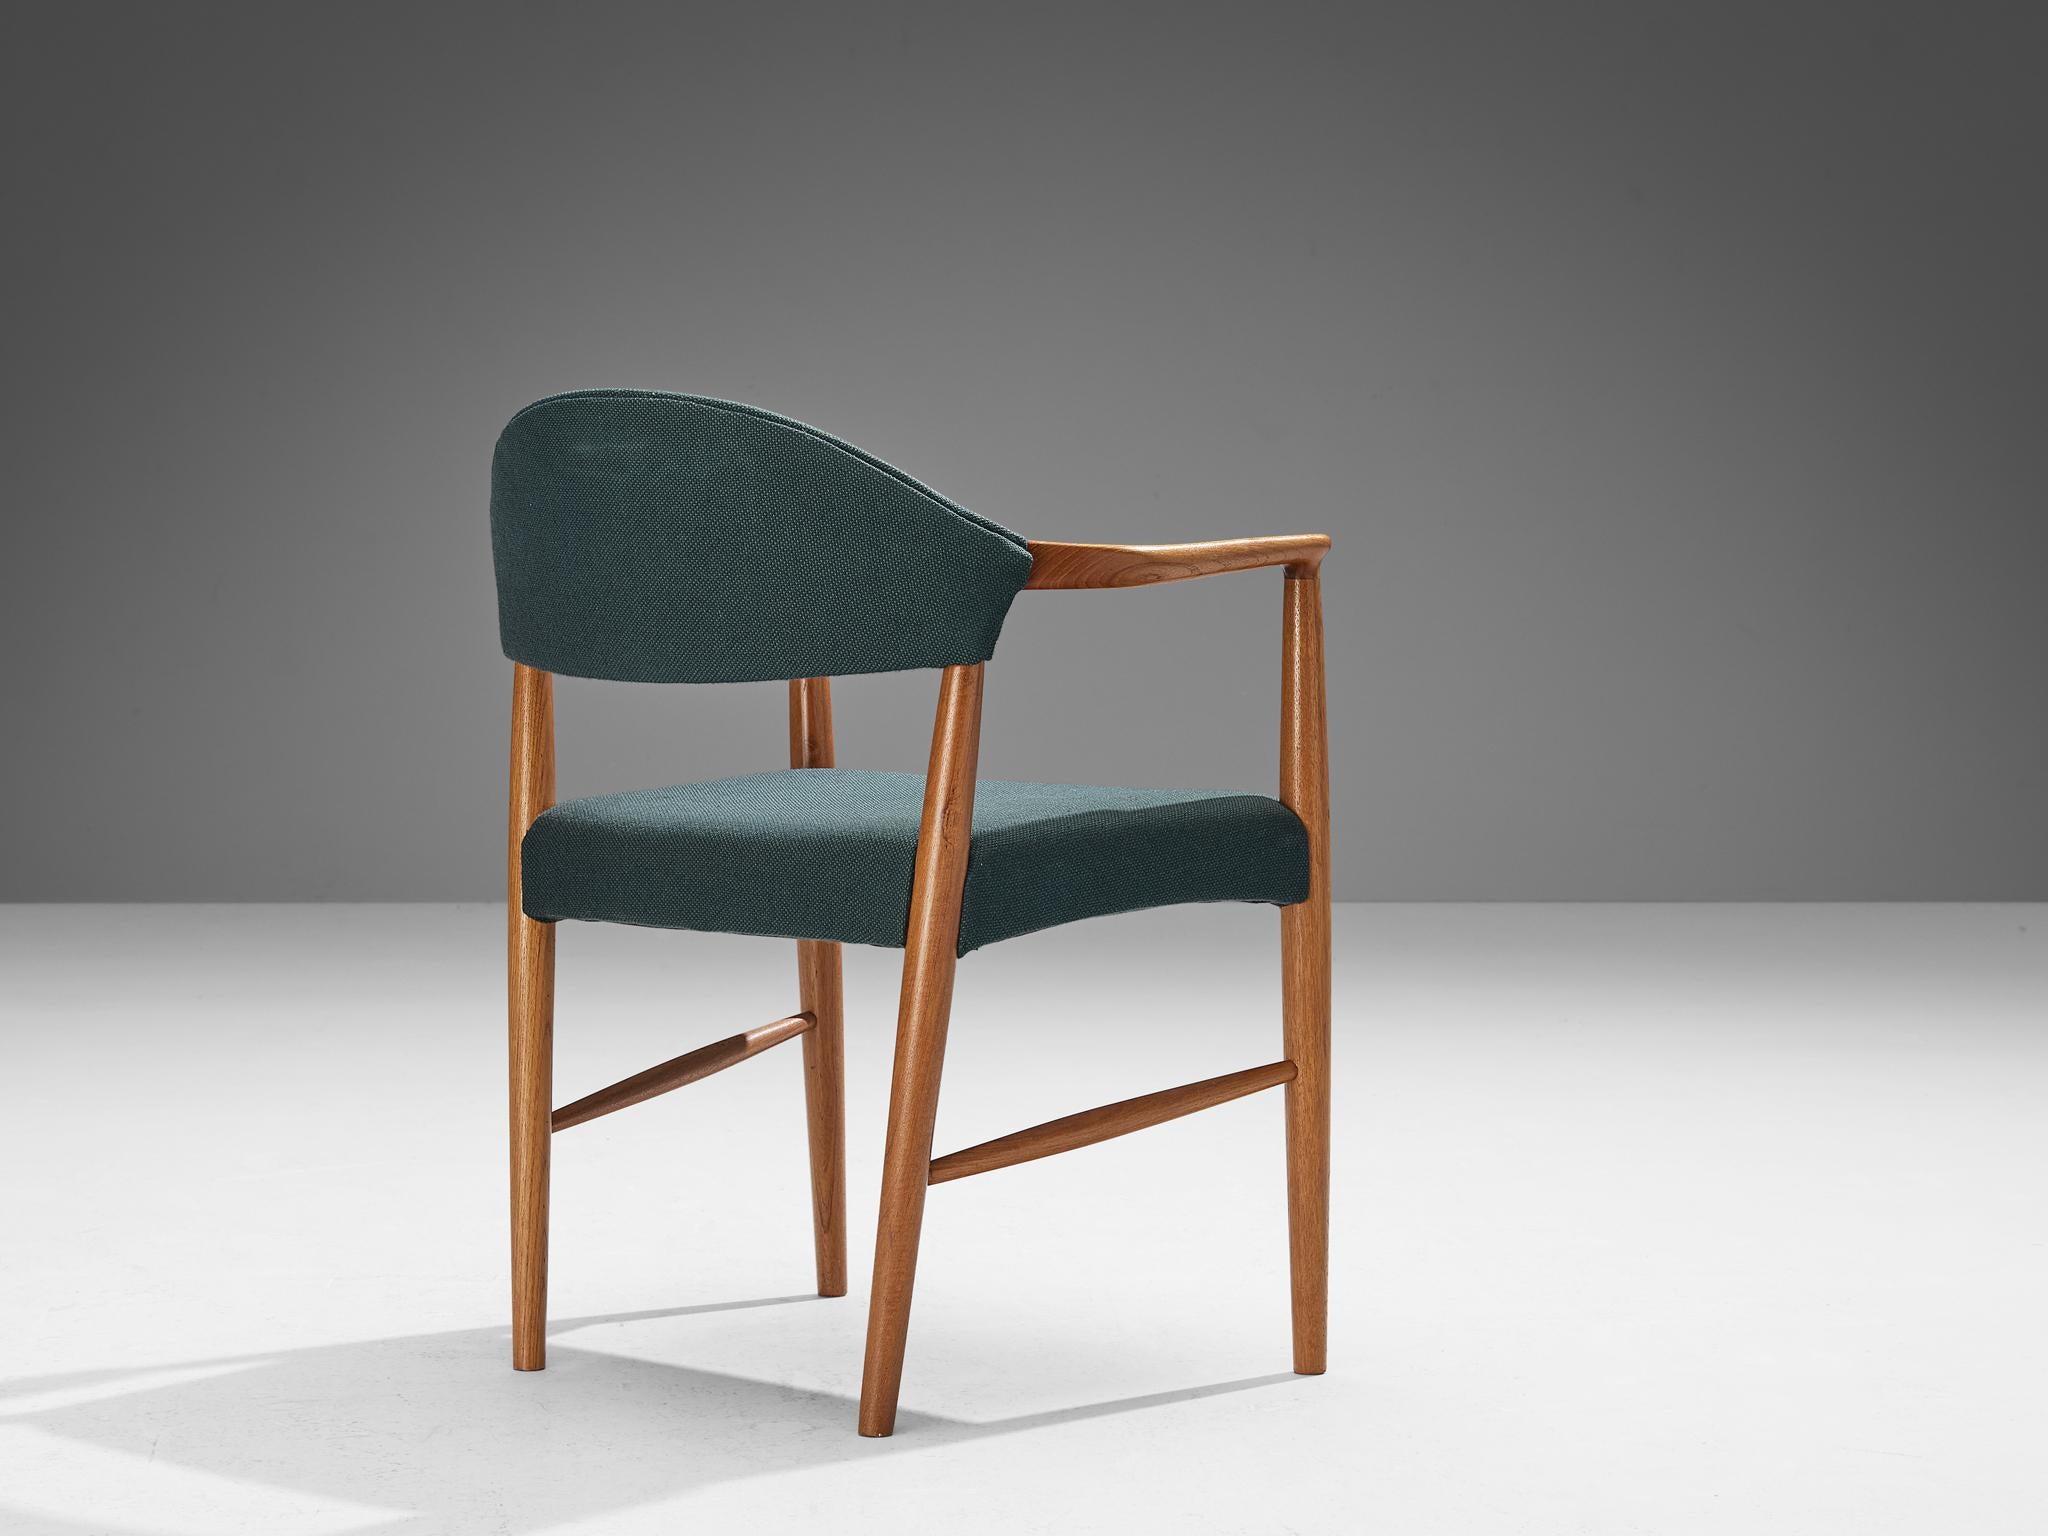 Kurt Olsen for Slagelse Mobelvaerk, dining chair, model 223, fabric, teak, Denmark, 1960s

This armchair is designed by Kurt Olsen for Slagelse Mobelvaerk and epitomizes comfort and functionality through its impeccably shaped armrests and ergonomic